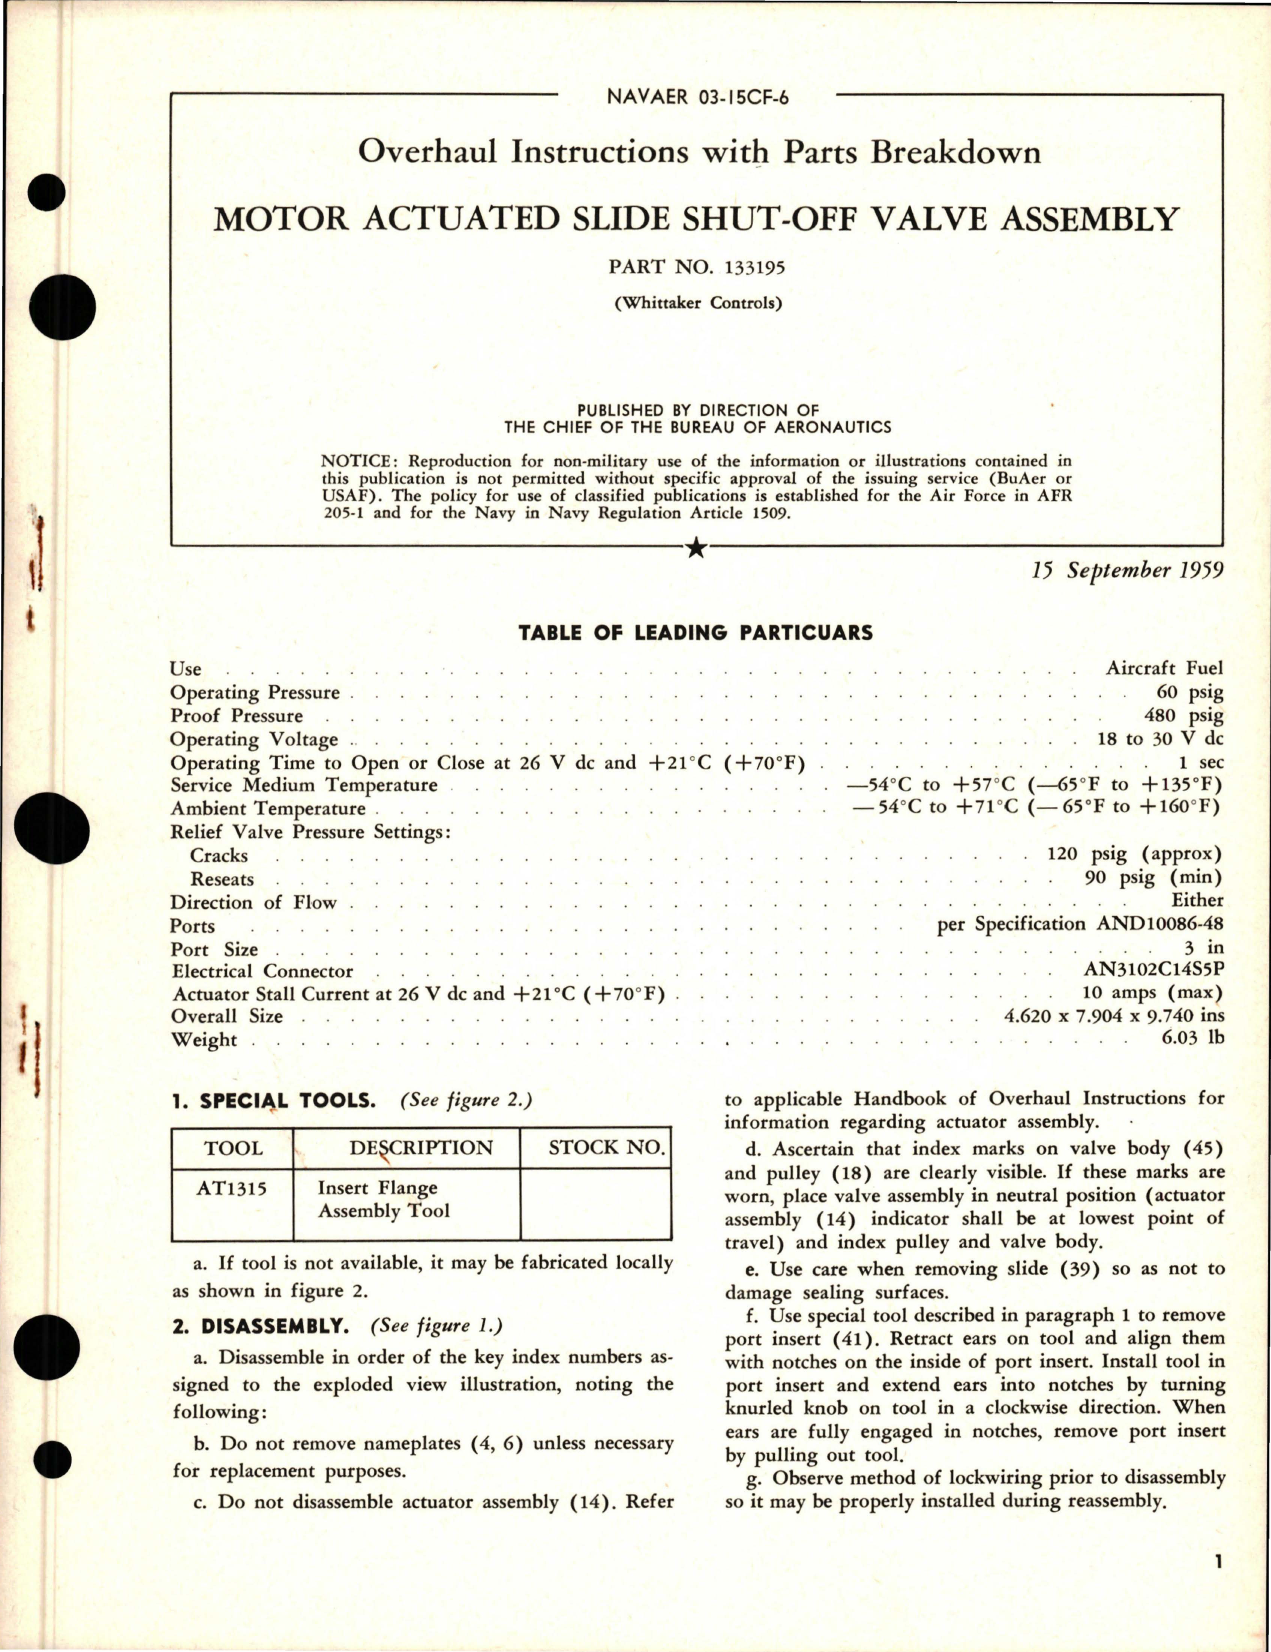 Sample page 1 from AirCorps Library document: Overhaul Instructions with Parts Breakdown for Motor Actuated Slide Shut Off Valve Assembly - Part 133195